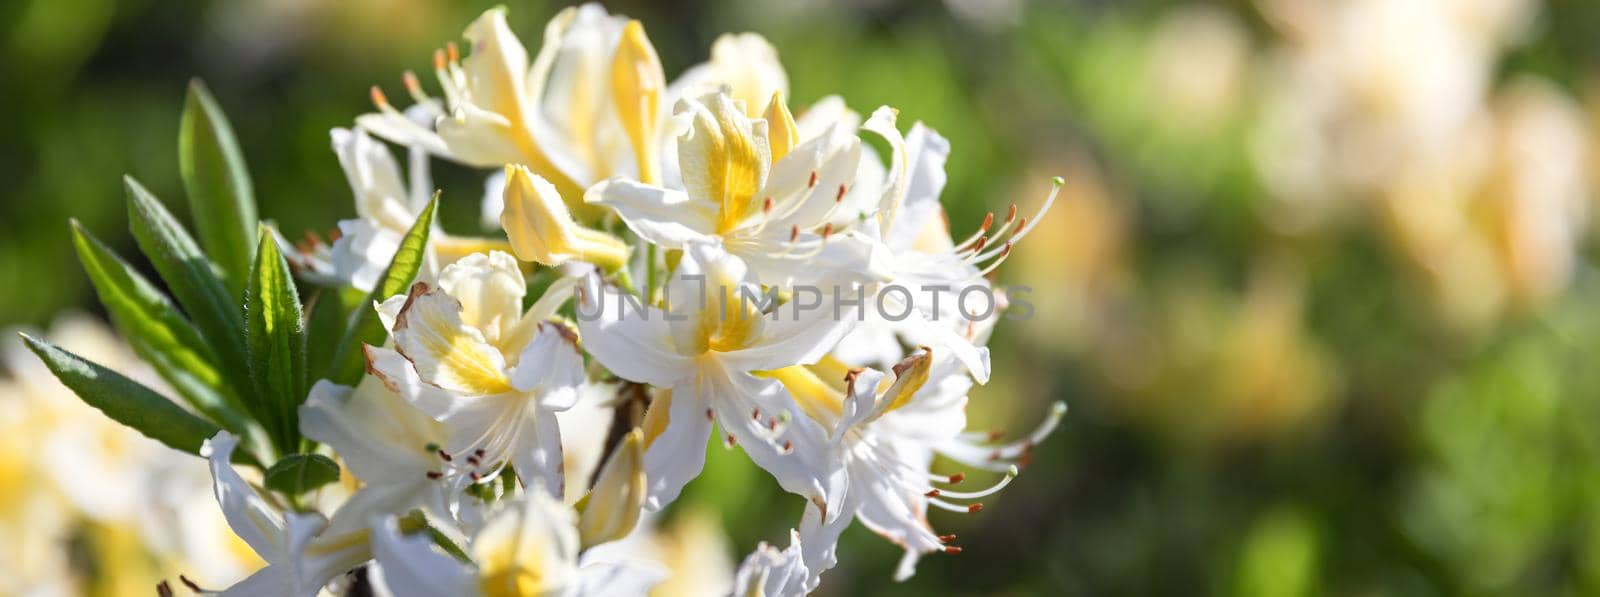 Beautiful outdoor floral background with yellow rhododendrons. Bush of delicate yellow flowers of azalea or Rhododendron plant in a sunny spring day